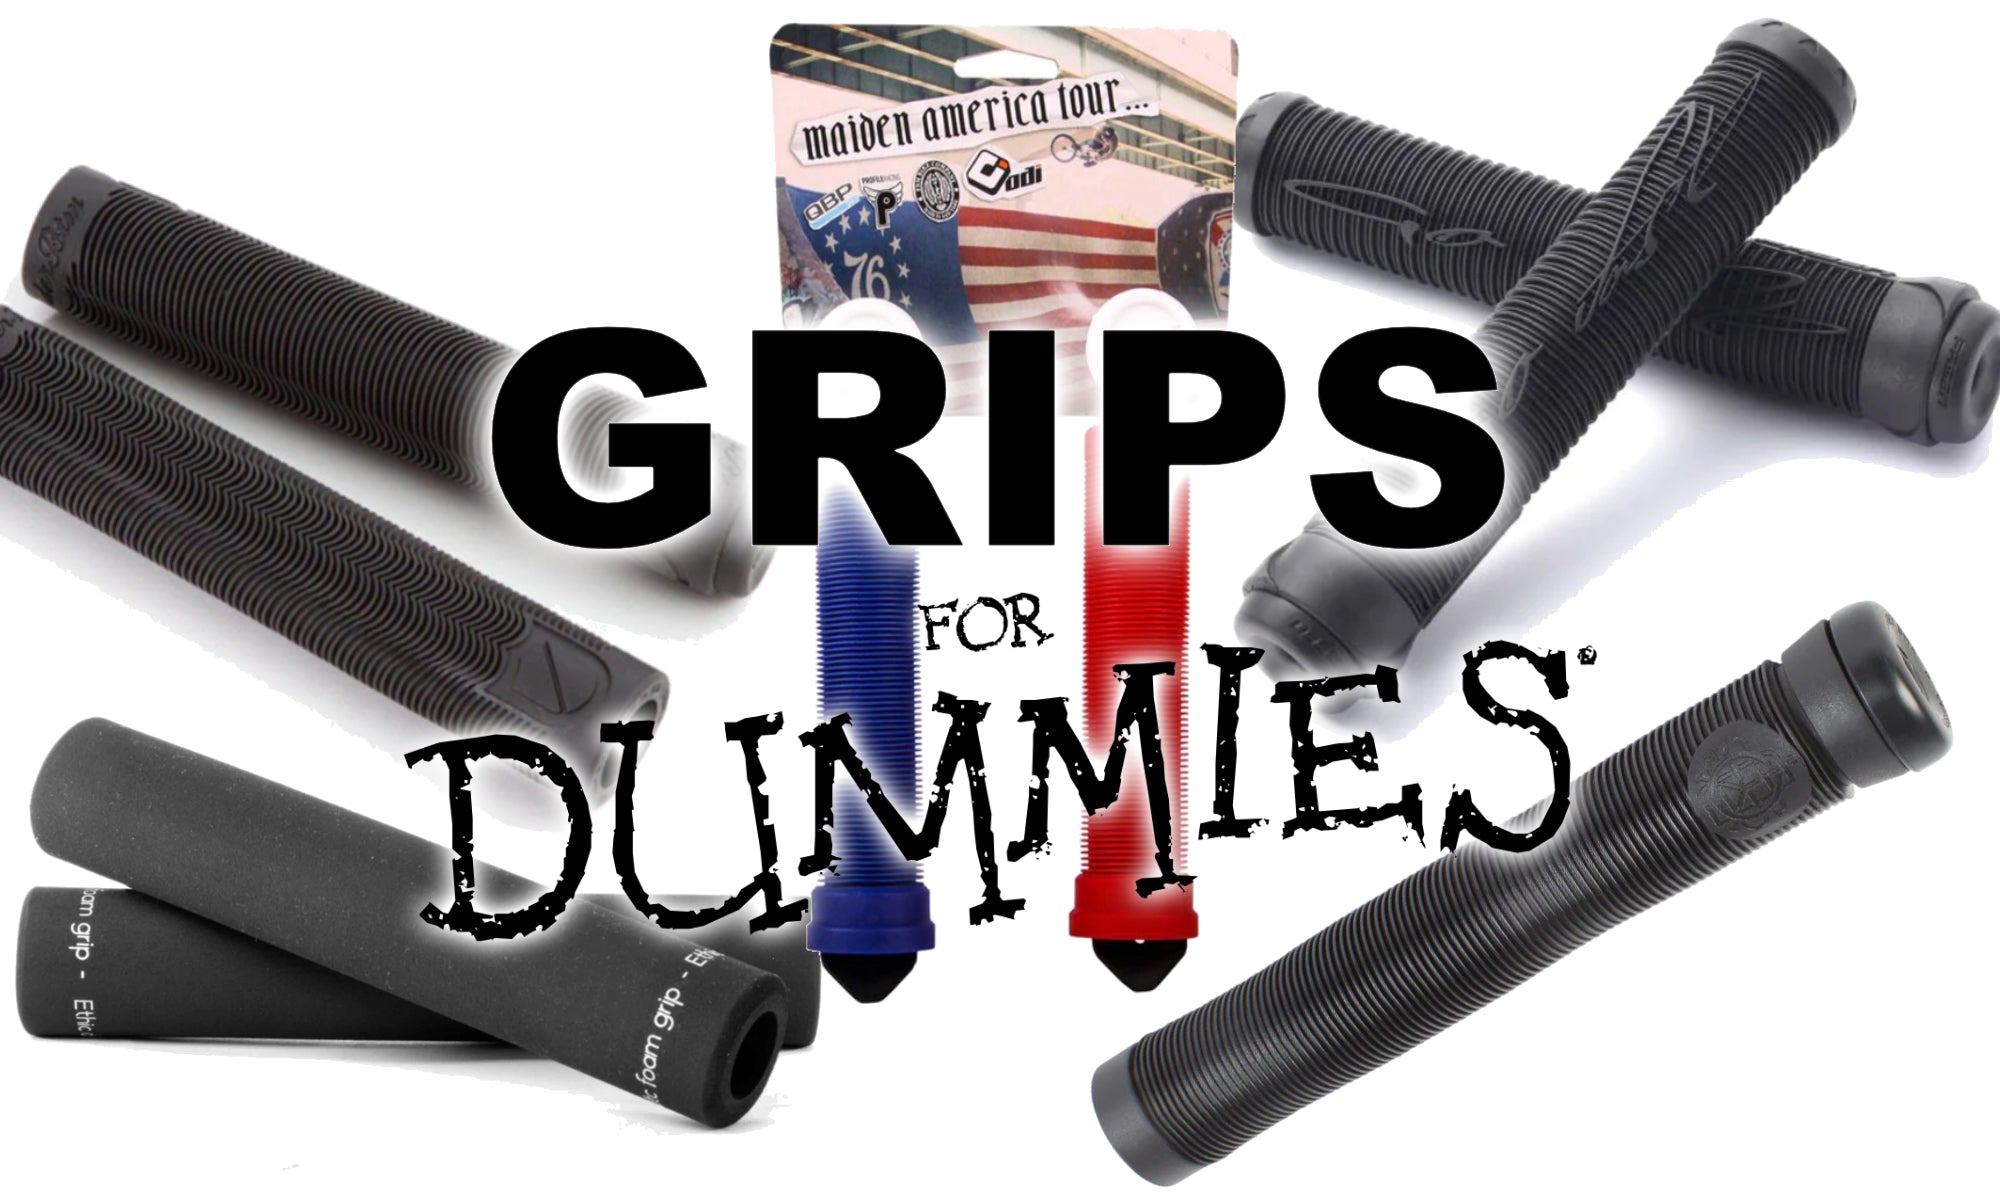 Choose your grips